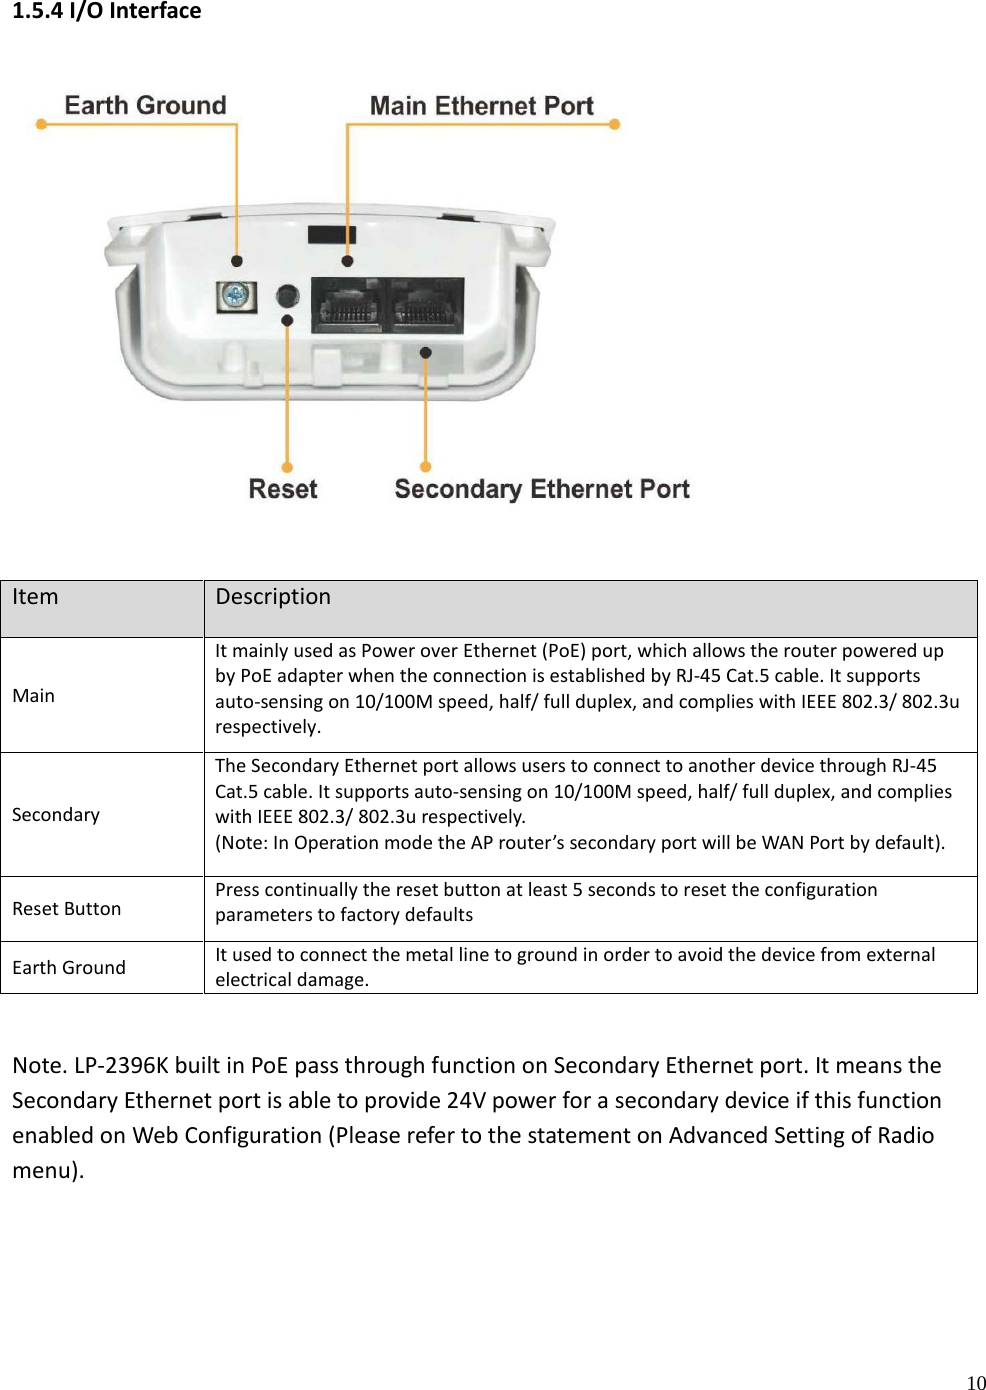 10 1.5.4 I/O Interface Item Description Main It mainly used as Power over Ethernet (PoE) port, which allows the router powered up by PoE adapter when the connection is established by RJ-45 Cat.5 cable. It supports auto-sensing on 10/100M speed, half/ full duplex, and complies with IEEE 802.3/ 802.3u respectively. Secondary The Secondary Ethernet port allows users to connect to another device through RJ-45 Cat.5 cable. It supports auto-sensing on 10/100M speed, half/ full duplex, and complies with IEEE 802.3/ 802.3u respectively.  (Note: In Operation mode the AP router’s secondary port will be WAN Port by default). Reset Button Press continually the reset button at least 5 seconds to reset the configuration parameters to factory defaults Earth Ground It used to connect the metal line to ground in order to avoid the device from external electrical damage. Note. LP-2396K built in PoE pass through function on Secondary Ethernet port. It means the Secondary Ethernet port is able to provide 24V power for a secondary device if this function enabled on Web Configuration (Please refer to the statement on Advanced Setting of Radio menu). 